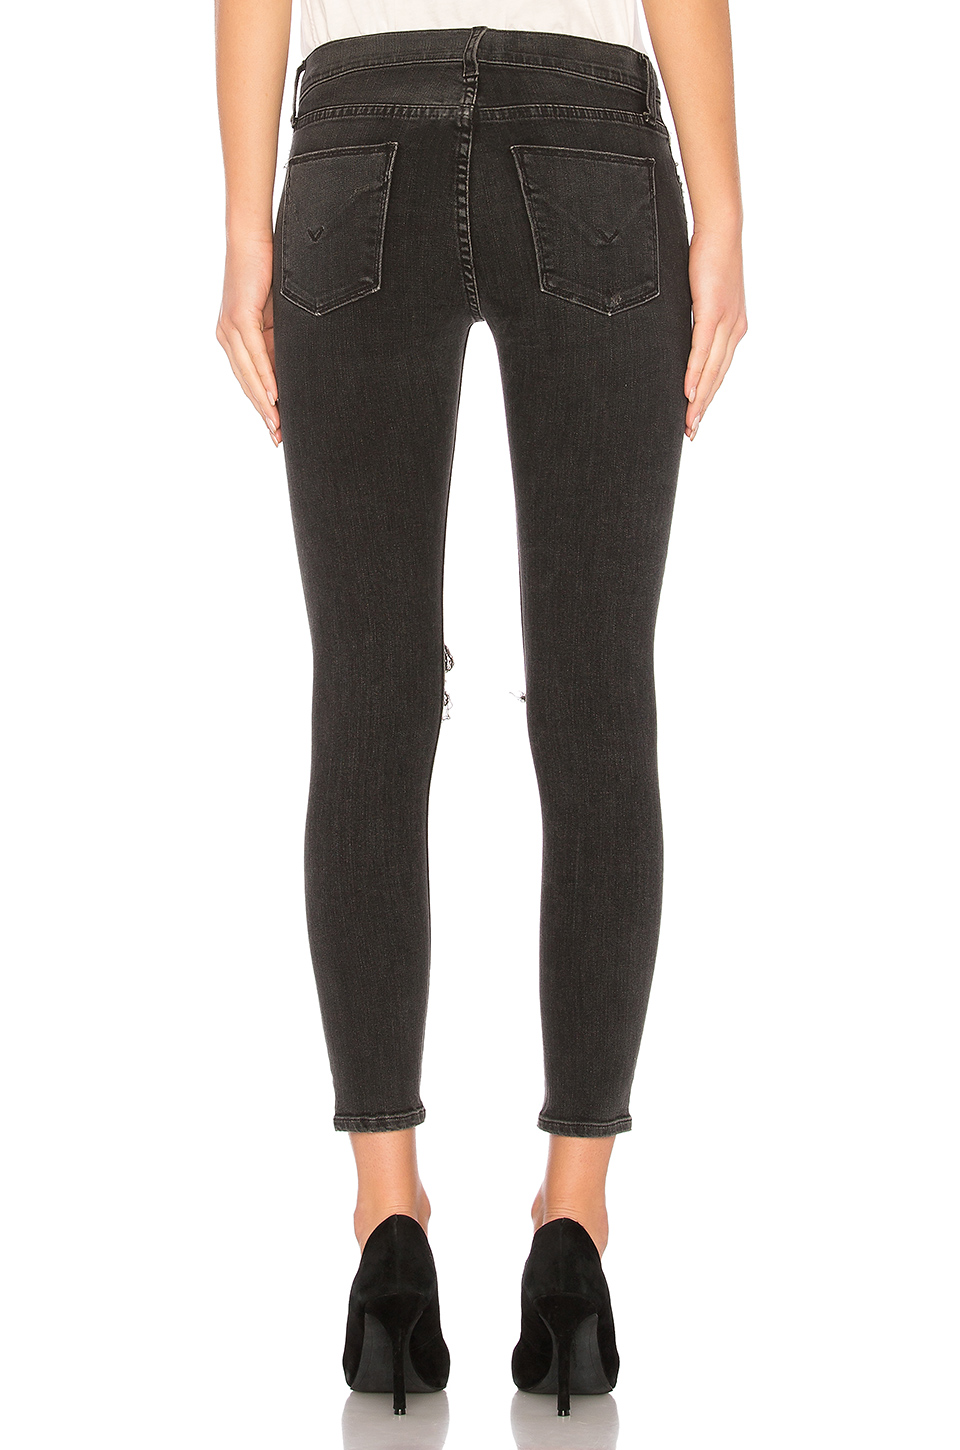 Find Of The Week: Hudson Nico Ankle Skinny in Time Bomb - THE JEANS BLOG